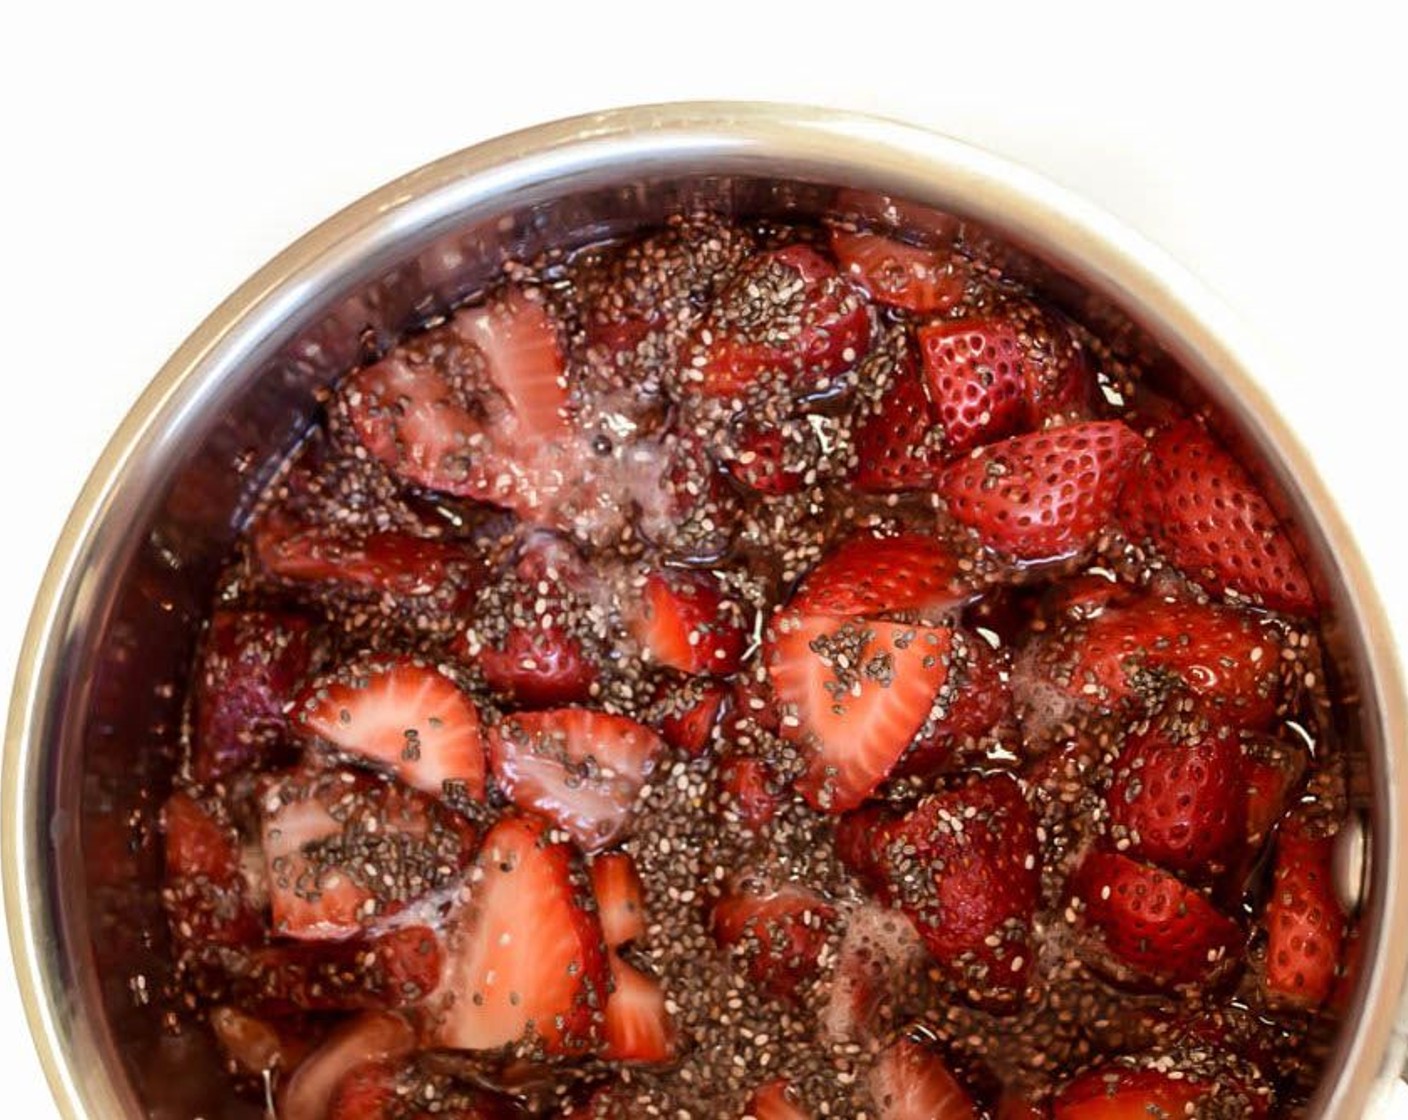 step 2 Combine the Fresh Strawberries (3 cups), Maple Syrup (2 Tbsp) and Water (1/3 cup) in a saucepan over medium heat. Bring to a simmer and allow to simmer until fruit is broken down and forms a jam-like consistency. Remove from heat and stir in Chia Seeds (1 Tbsp). Let cool slightly.